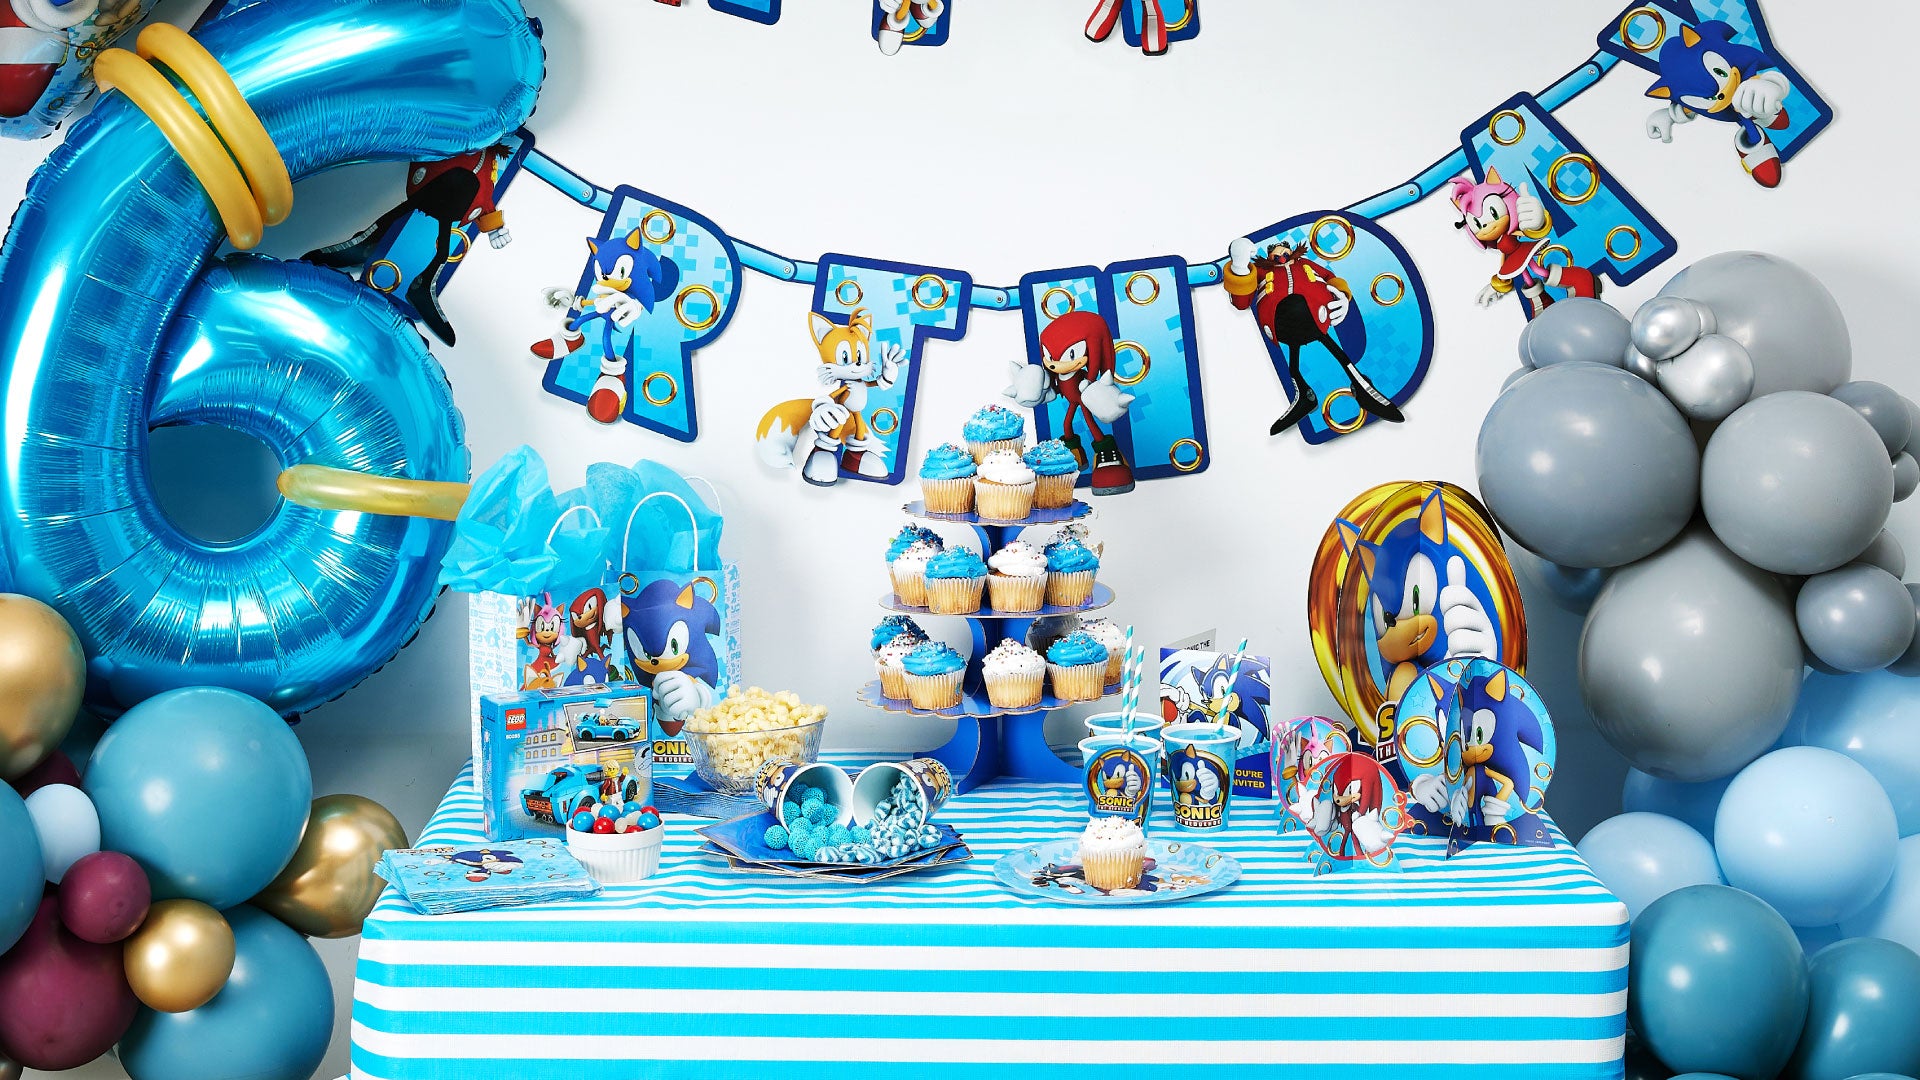 Sonic Birthday Party Supplies for Kids Sonic Party Decorations